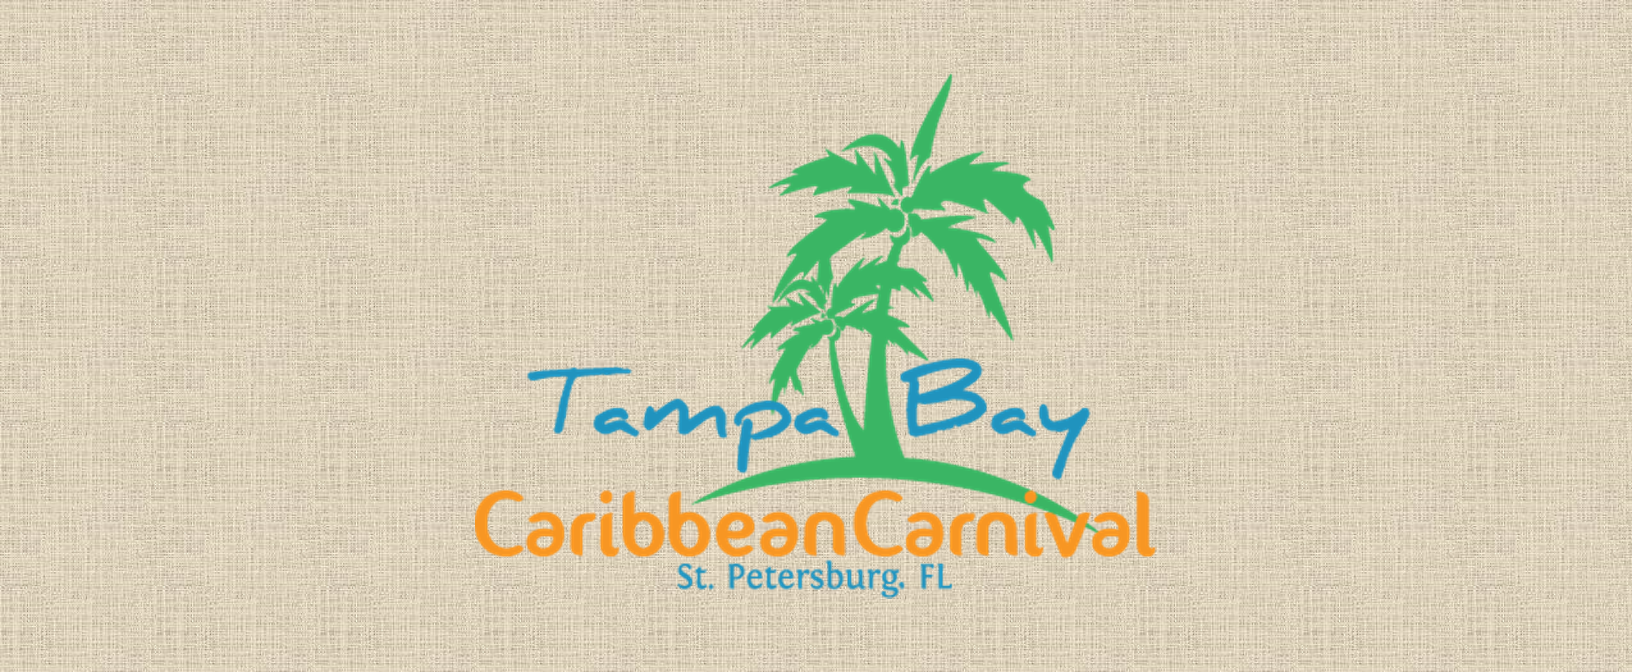 South Florida Promotions Agency Partners with Brandmark Advertising to Promote Tampa Bay Caribbean Carnival